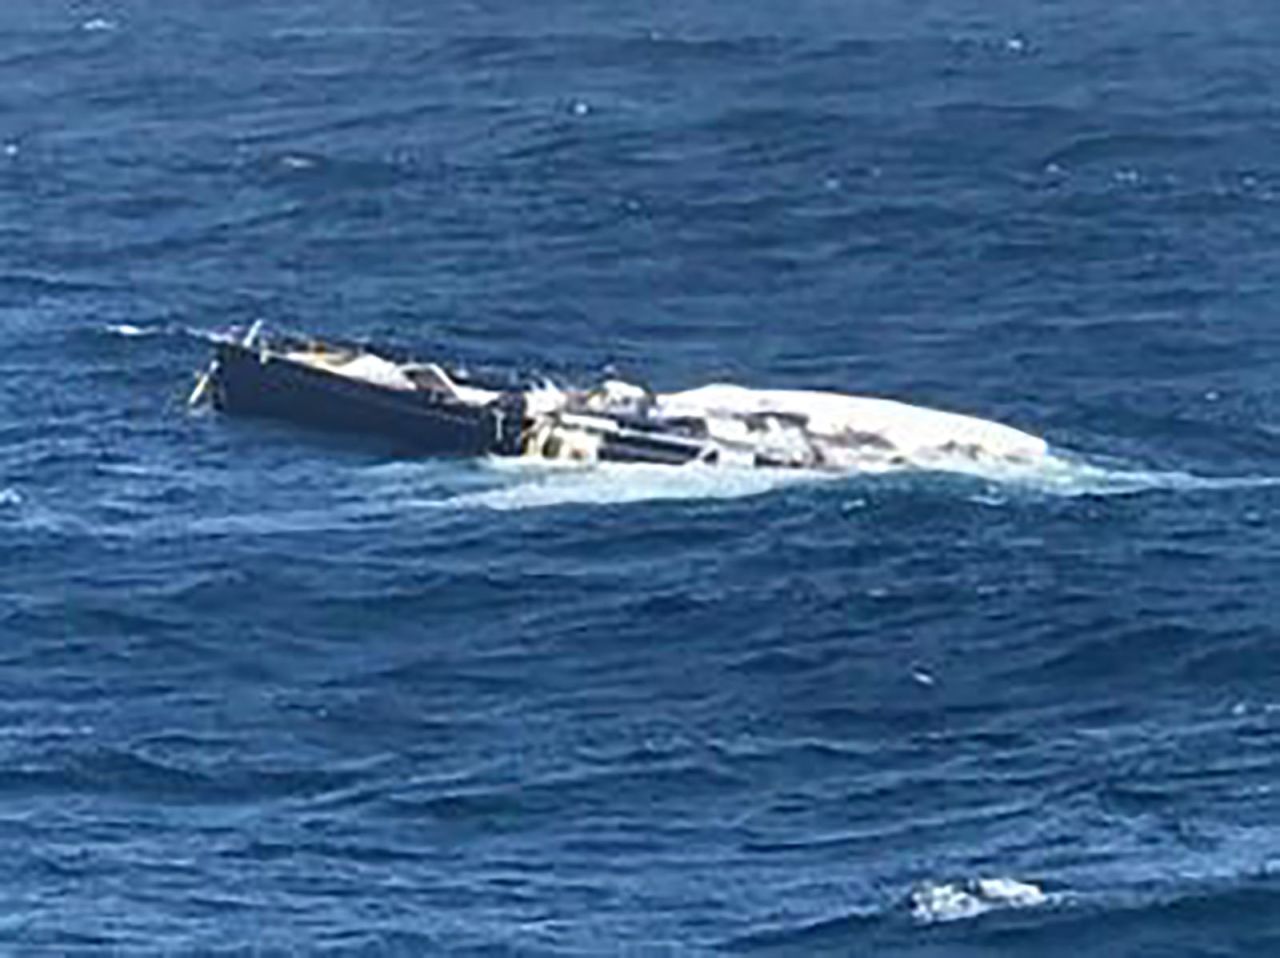 The custom boat, owned by the fashion heir Pier Luigi Loro Piana, was being transported between Mallorca and Genoa when the incident occurred.